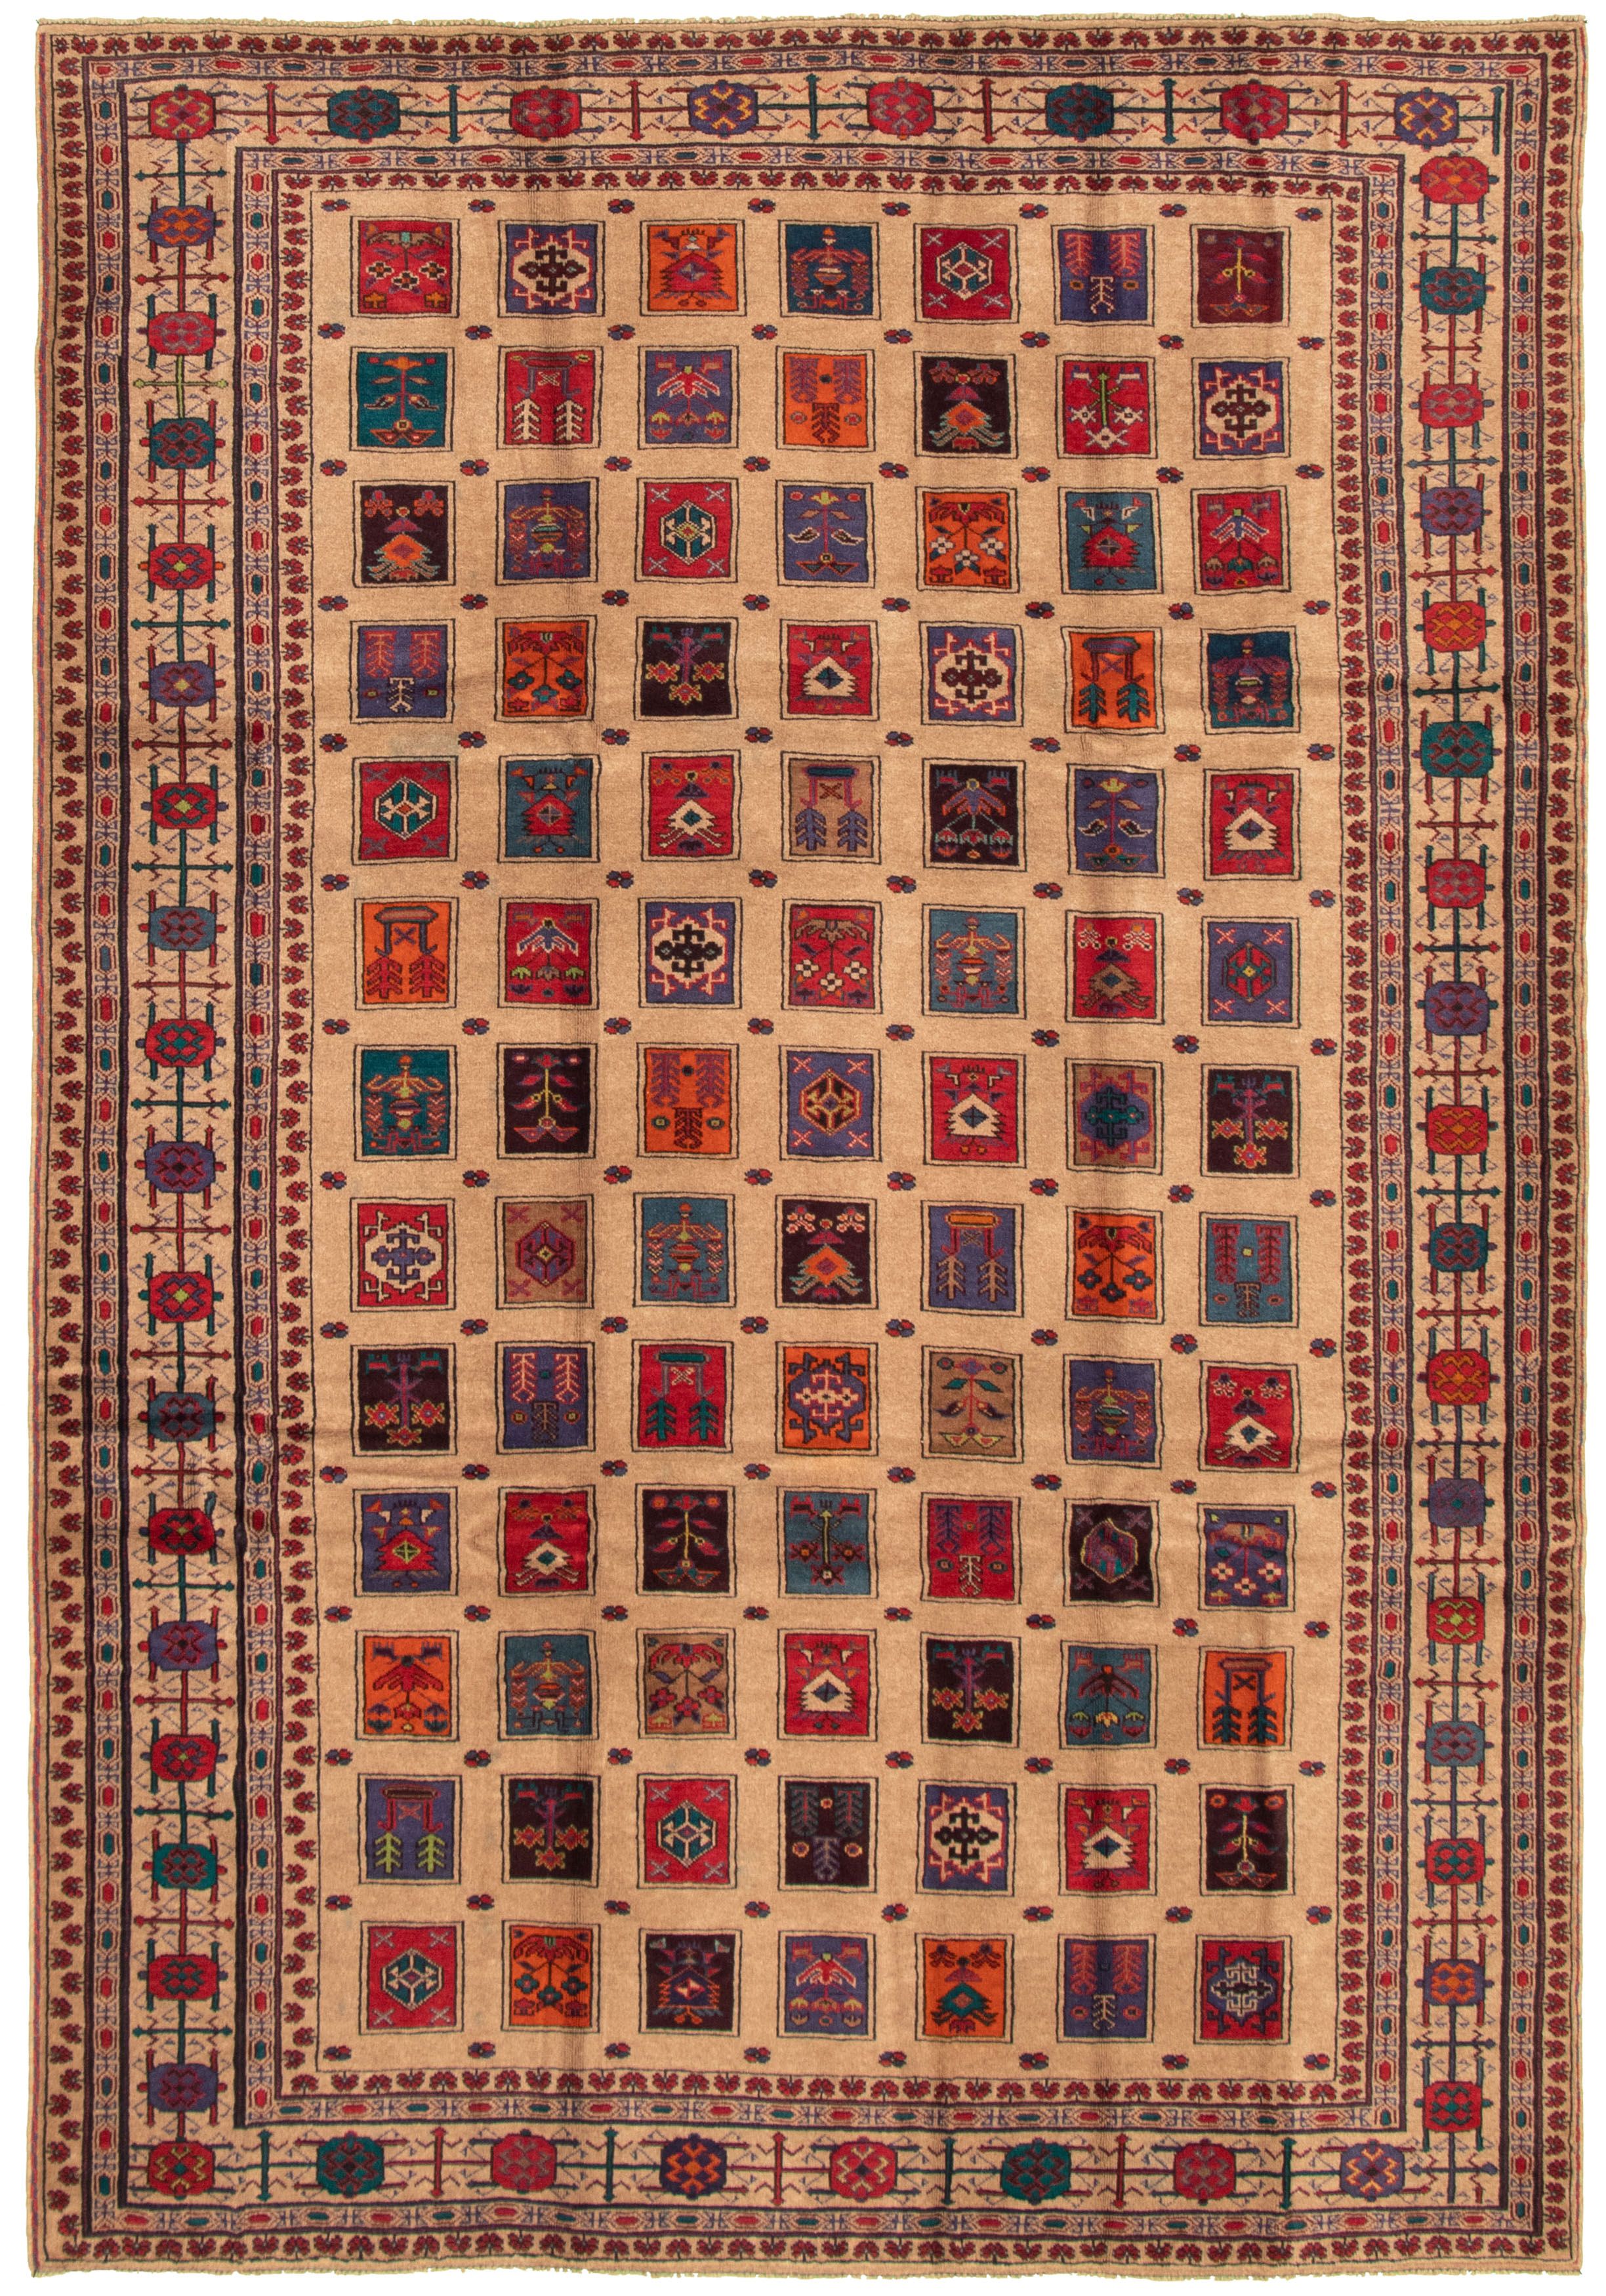 357378 Bedroom Rare War Bordered Brown Rug 6'7 x 9'8 eCarpet Gallery Large Area Rug for Living Room Hand-Knotted Wool Rug